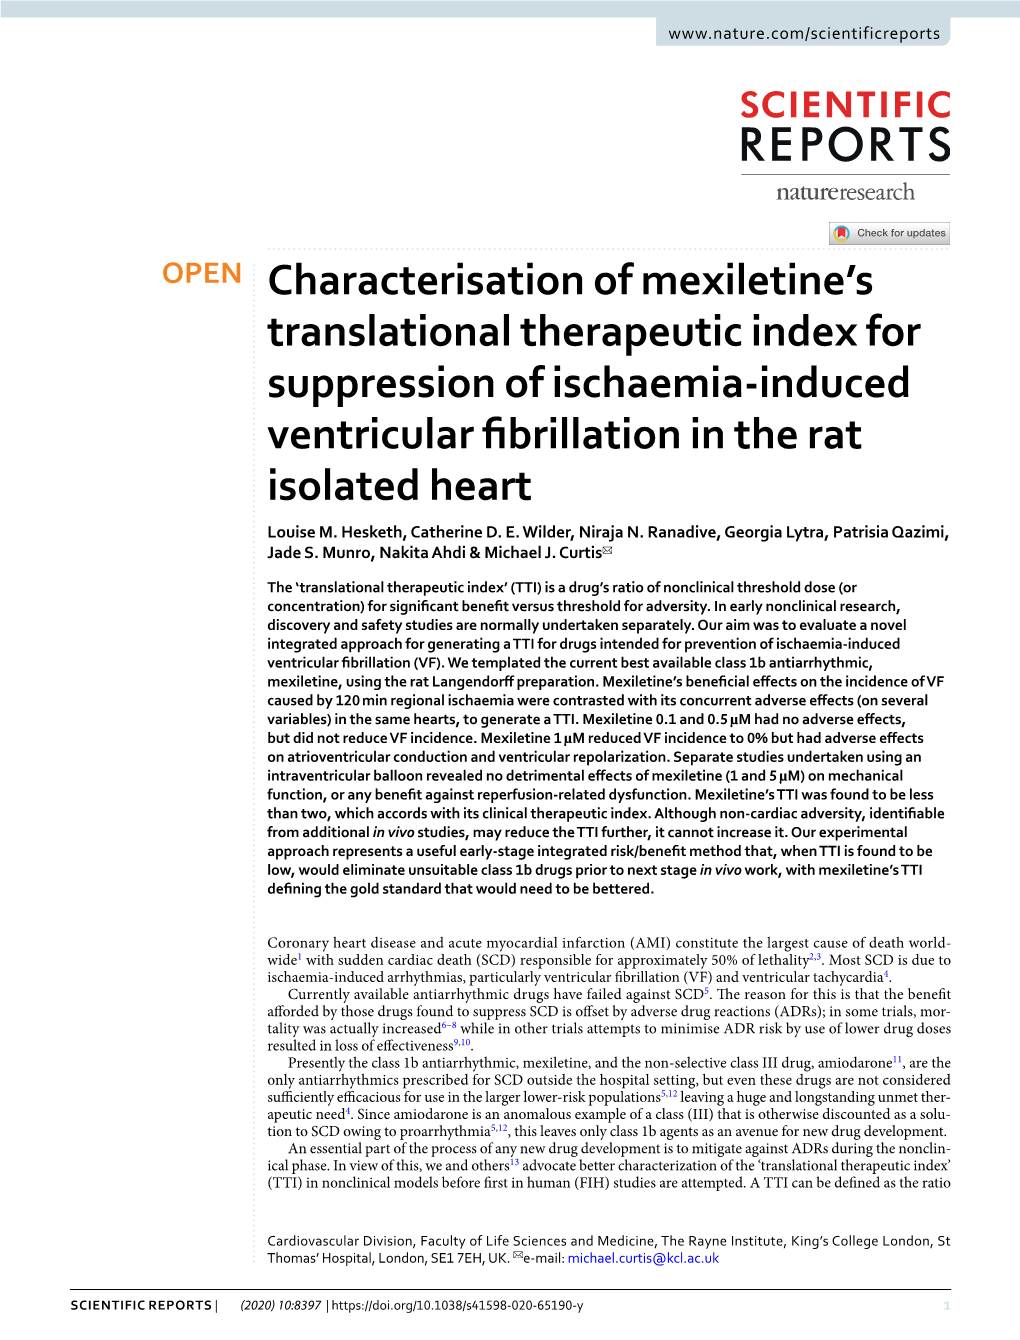 OPEN Characterisation of Mexiletine’S Translational Therapeutic Index for Suppression of Ischaemia-Induced Ventricular Fbrillation in the Rat Isolated Heart Louise M